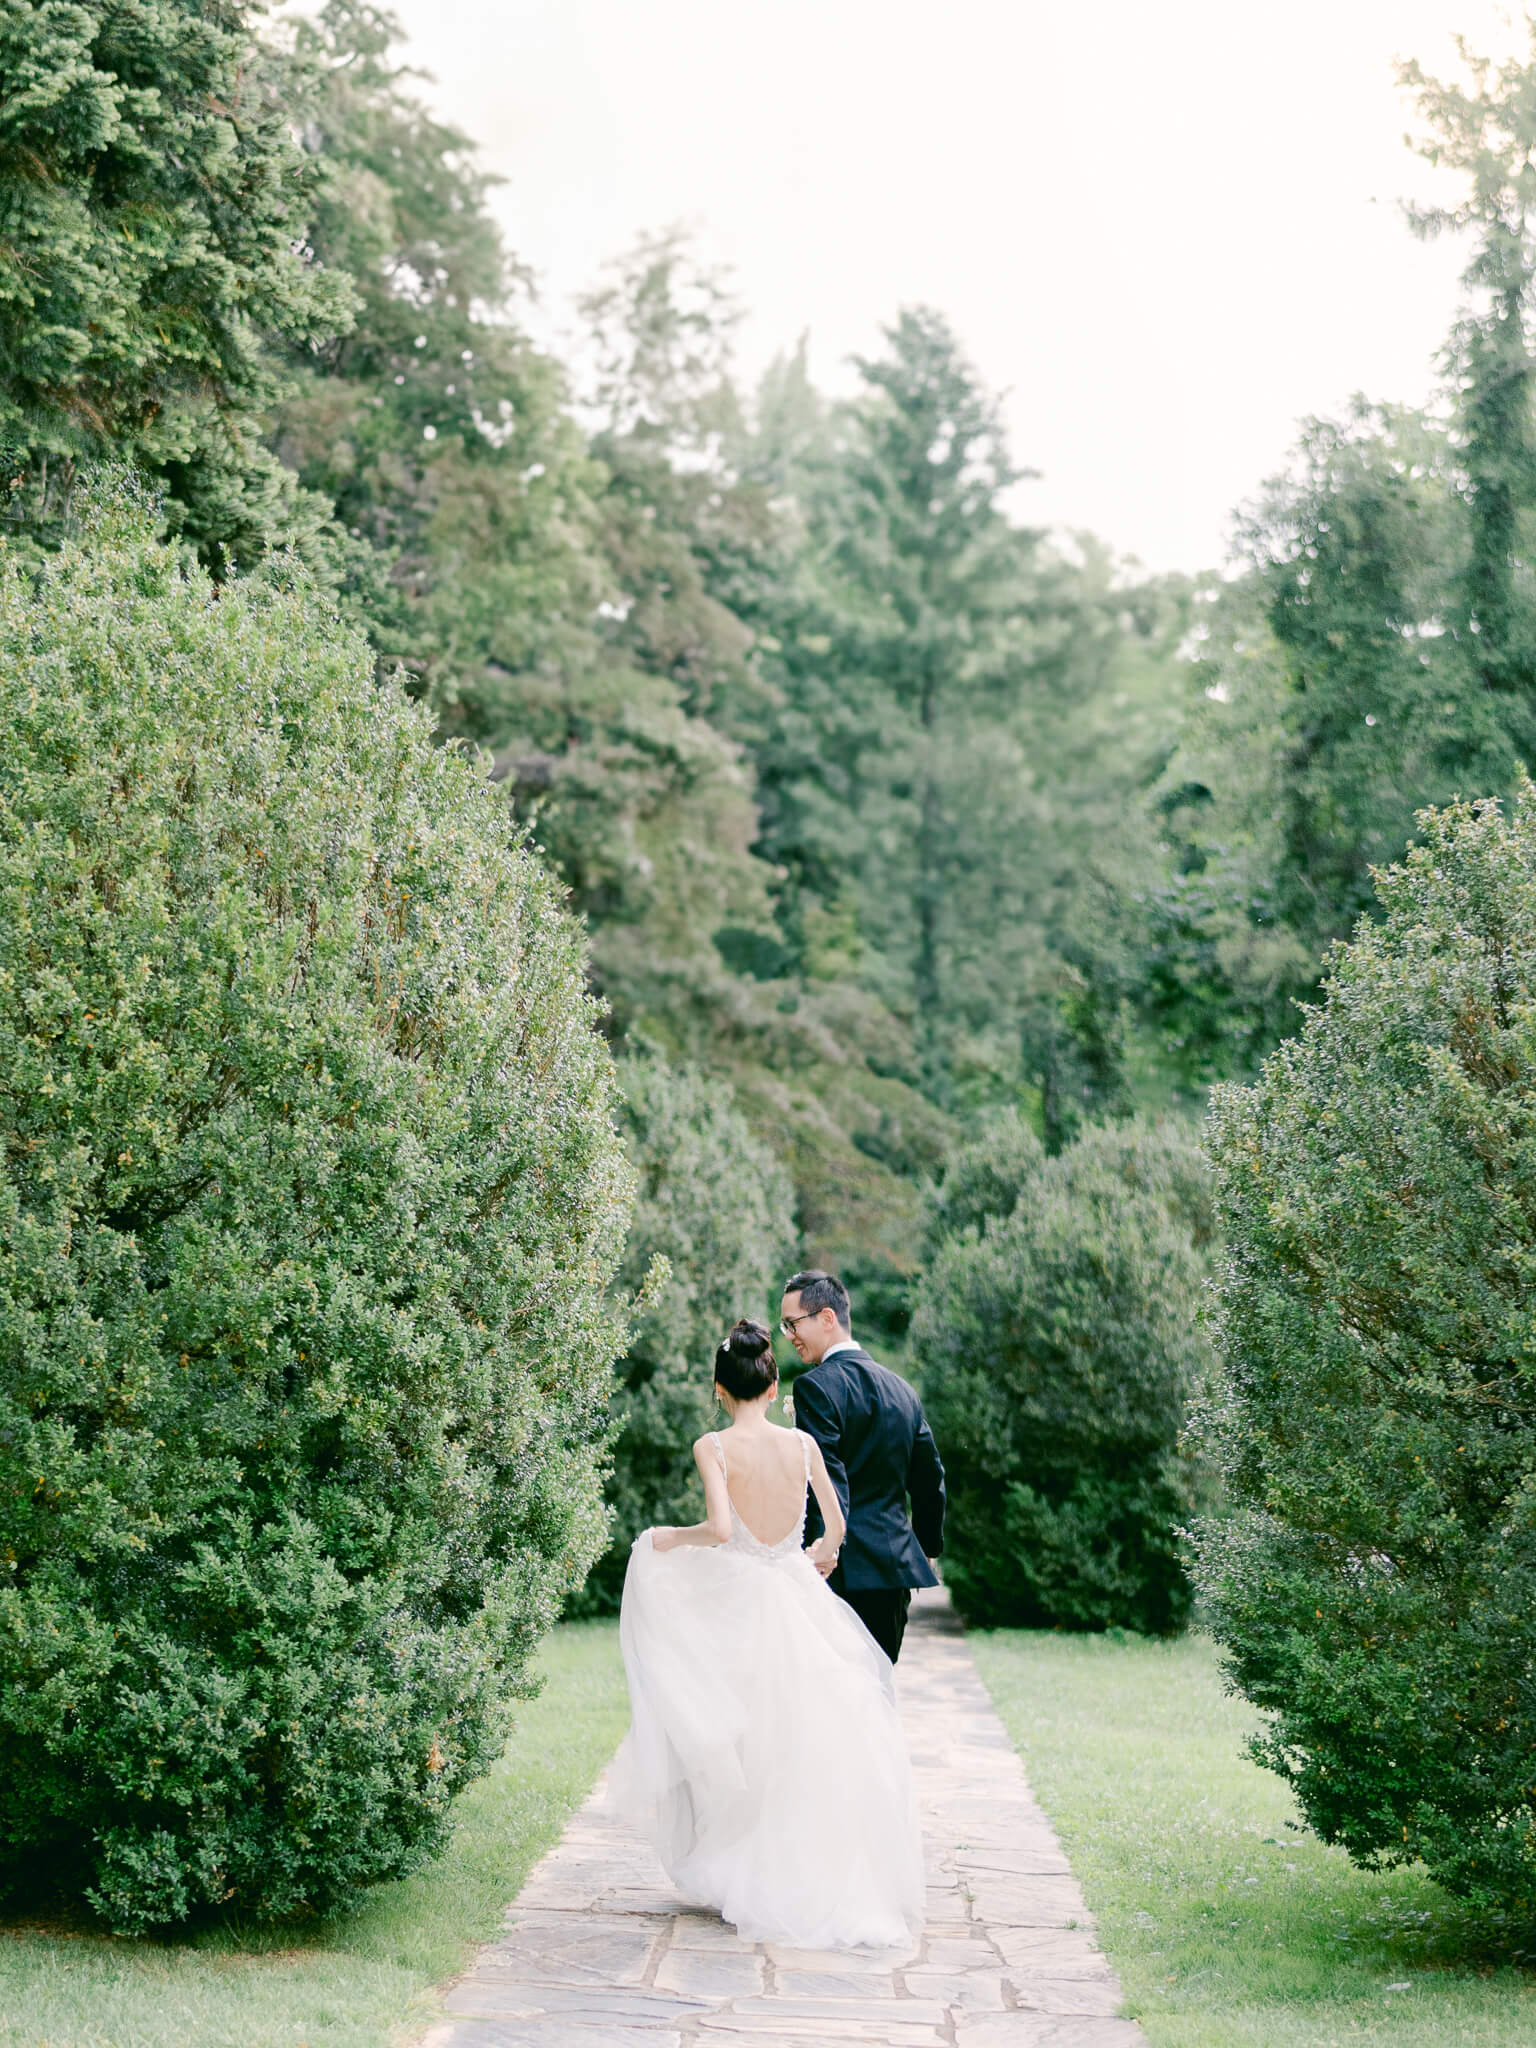 A bride and groom running away down a stone path between green shrubs and trees.